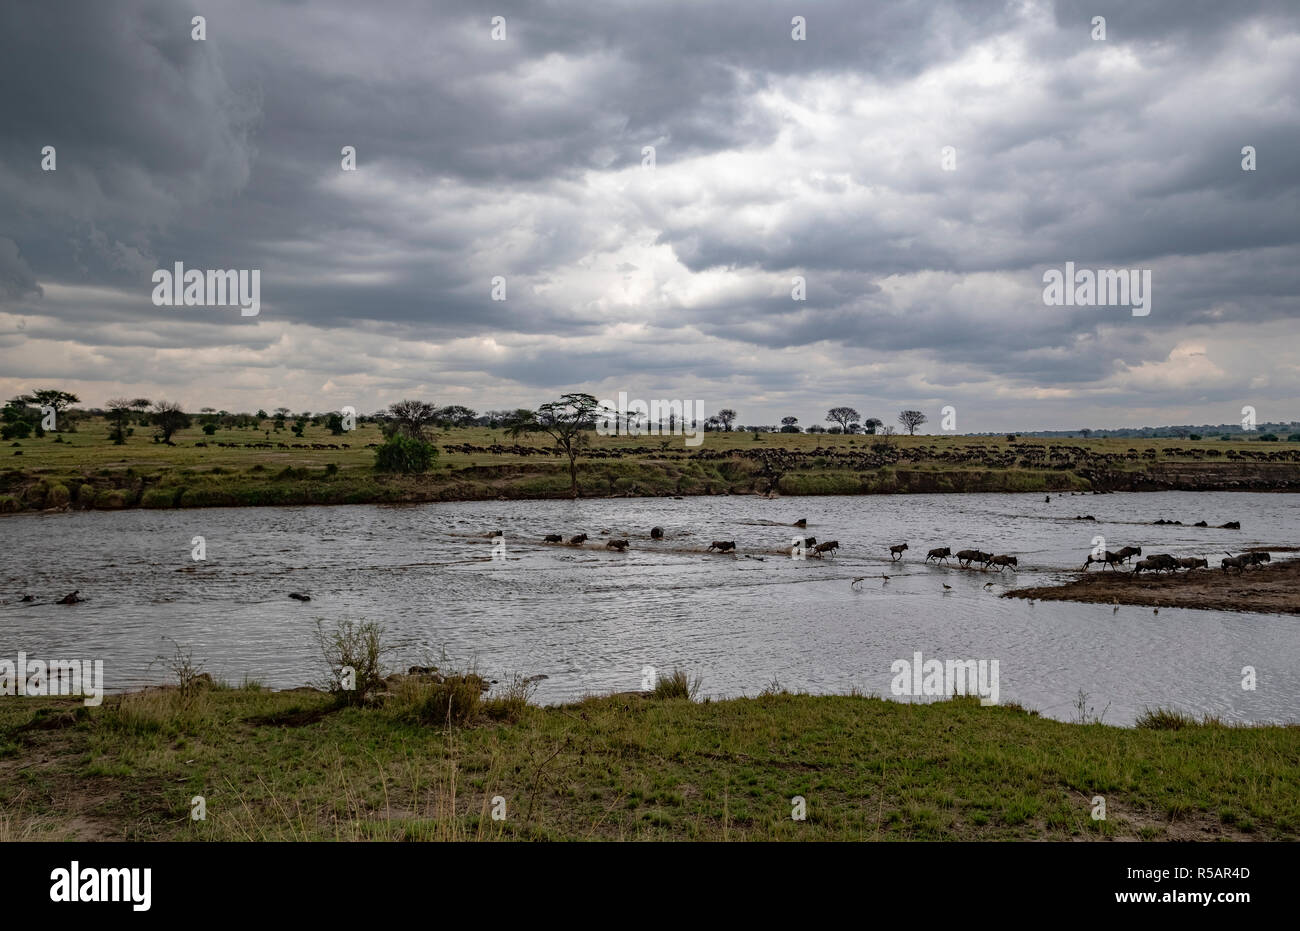 Wildebeest herd croosing the Mara River separating Tanzania and Kenya in an annual ritual migration of thousands of animals Stock Photo